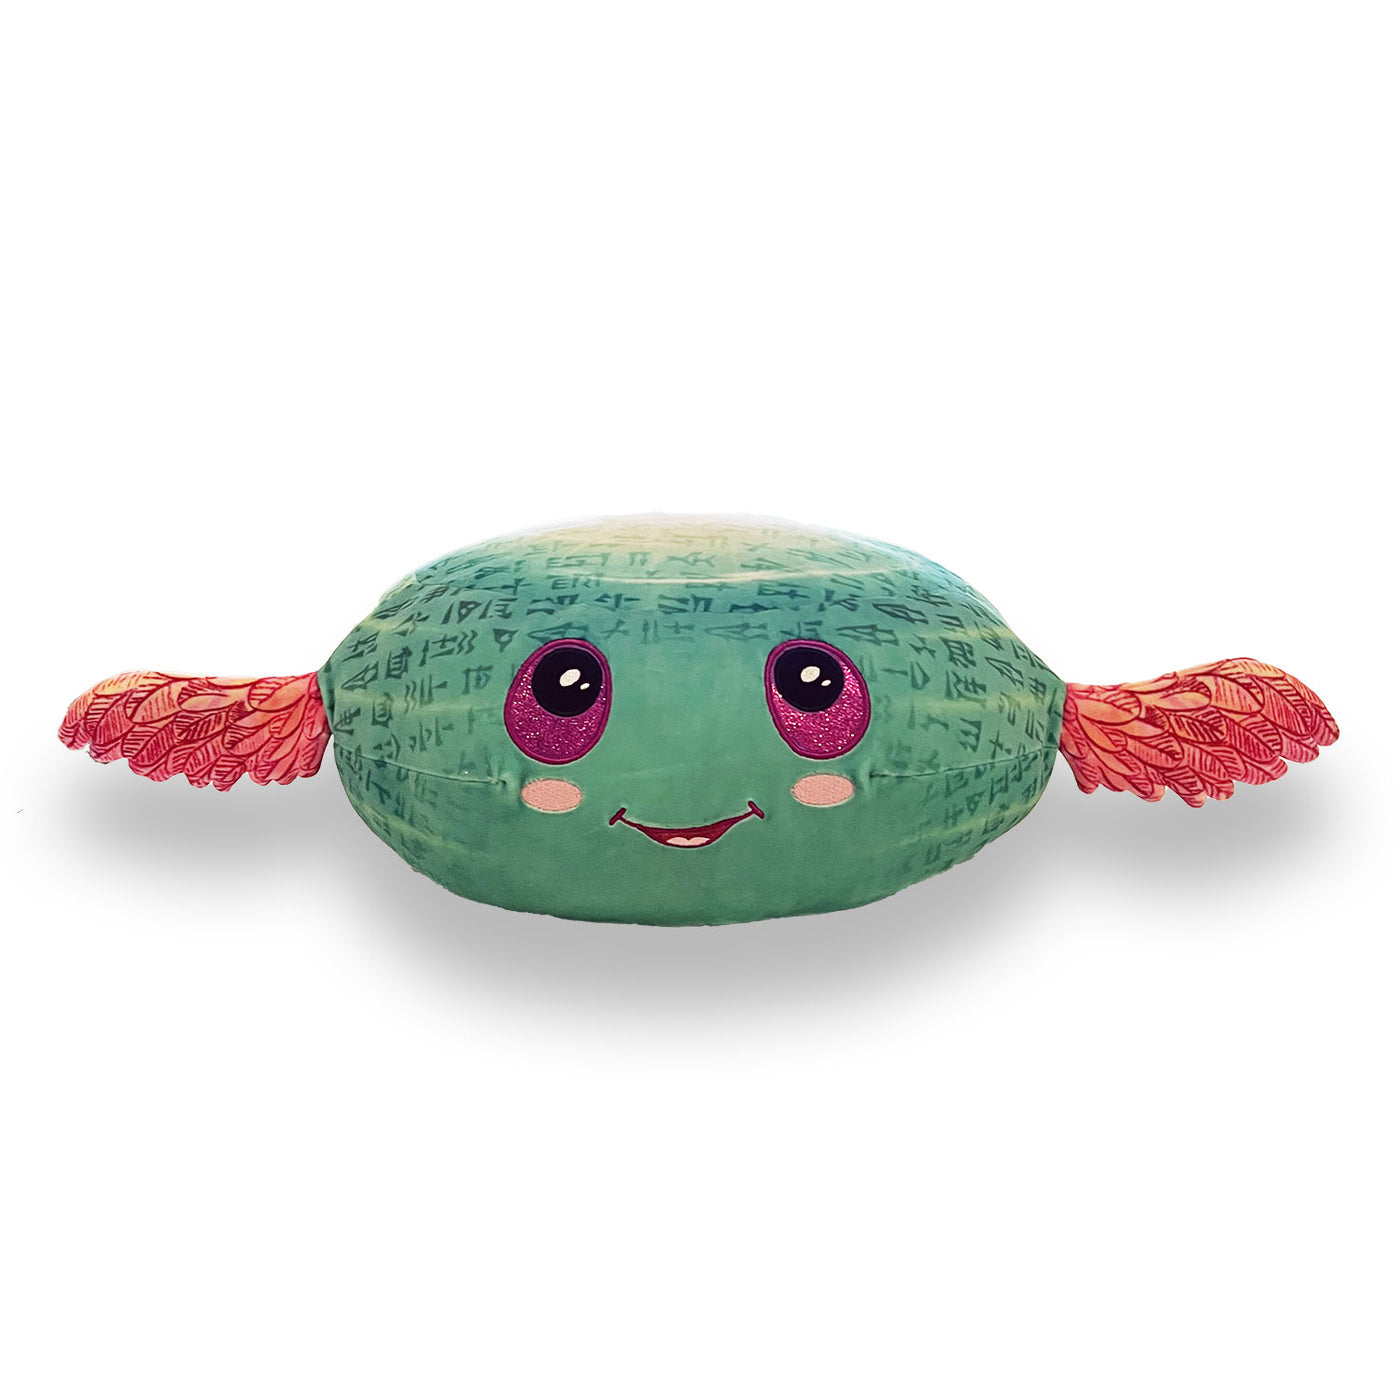 The Hug Who Got Stuck Plush Toy: Helping your kids to feel safe, loved and connected.